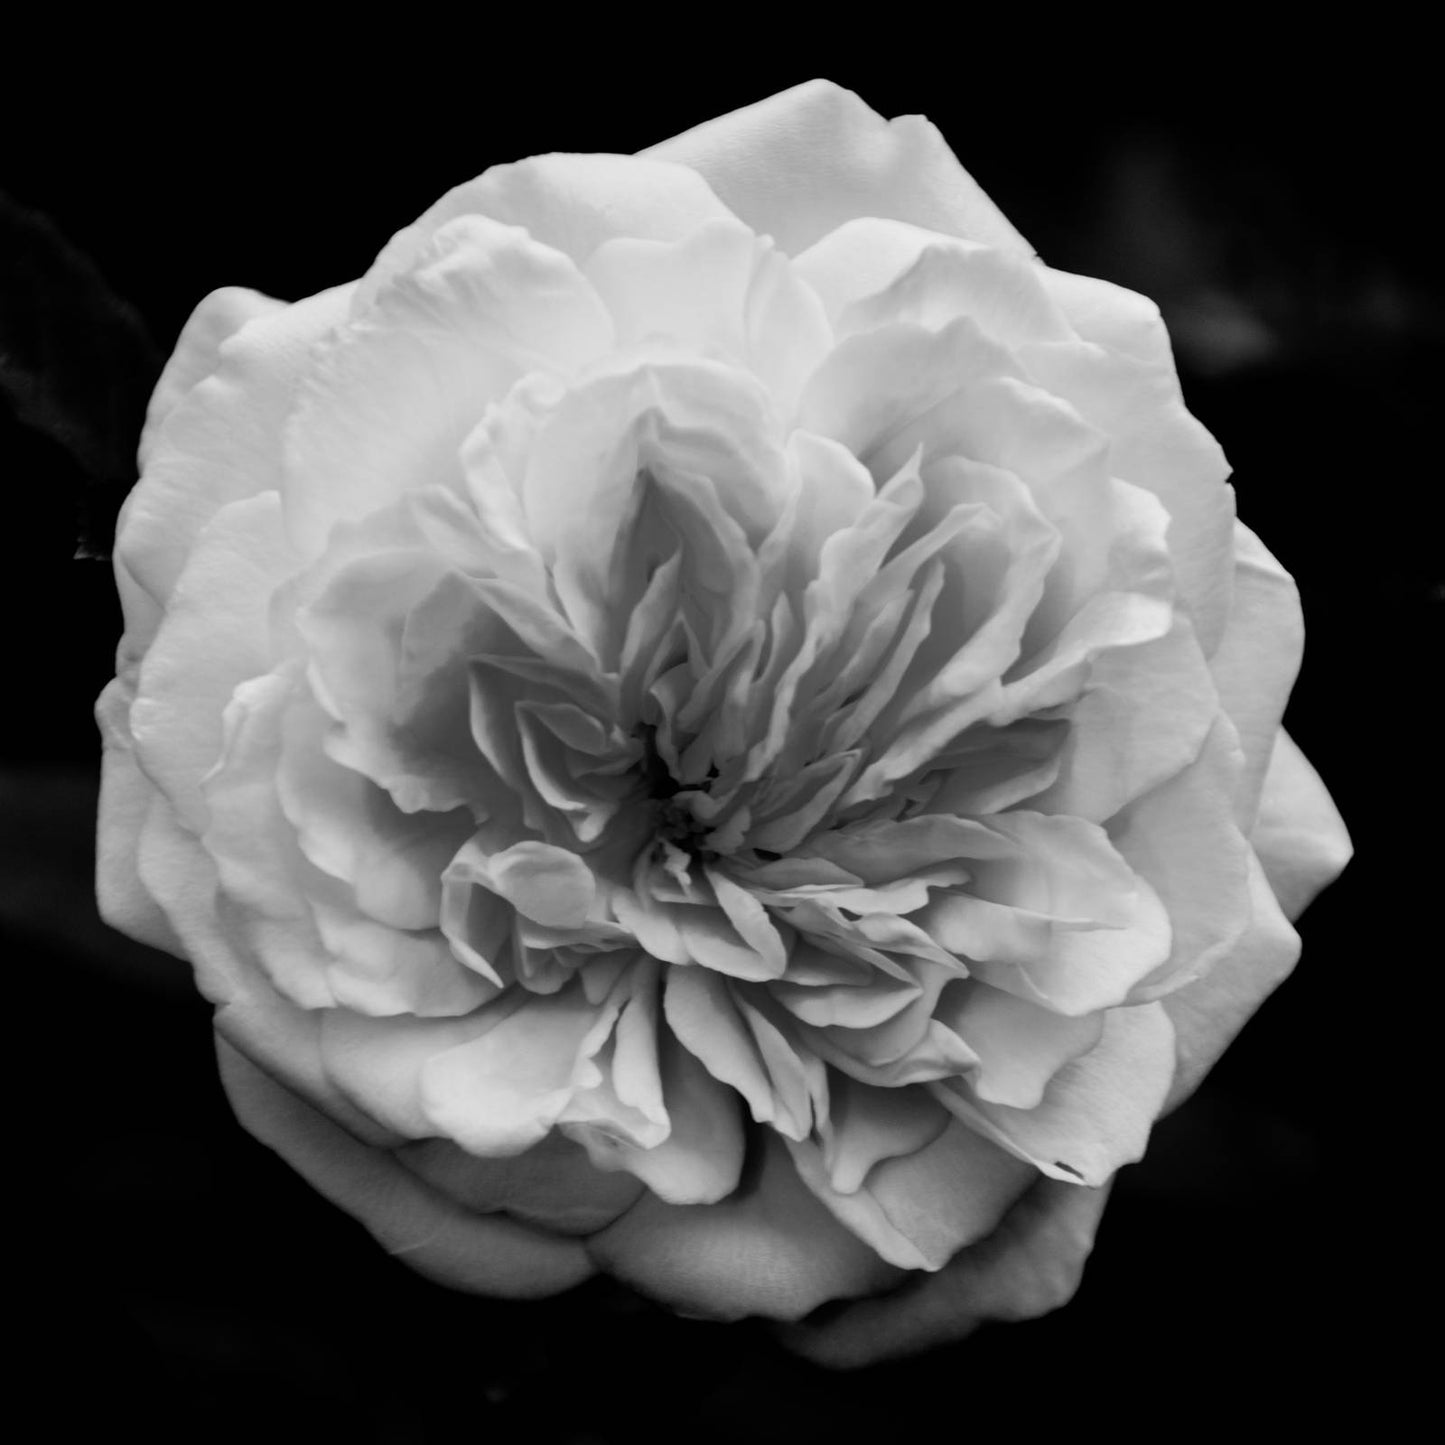 Living Room Wall Art Nature: Alchymist Rose Black & White - Square  Nature / Floral Photo Fine Art & Unframed Wall Art Prints  - PIPAFINEART